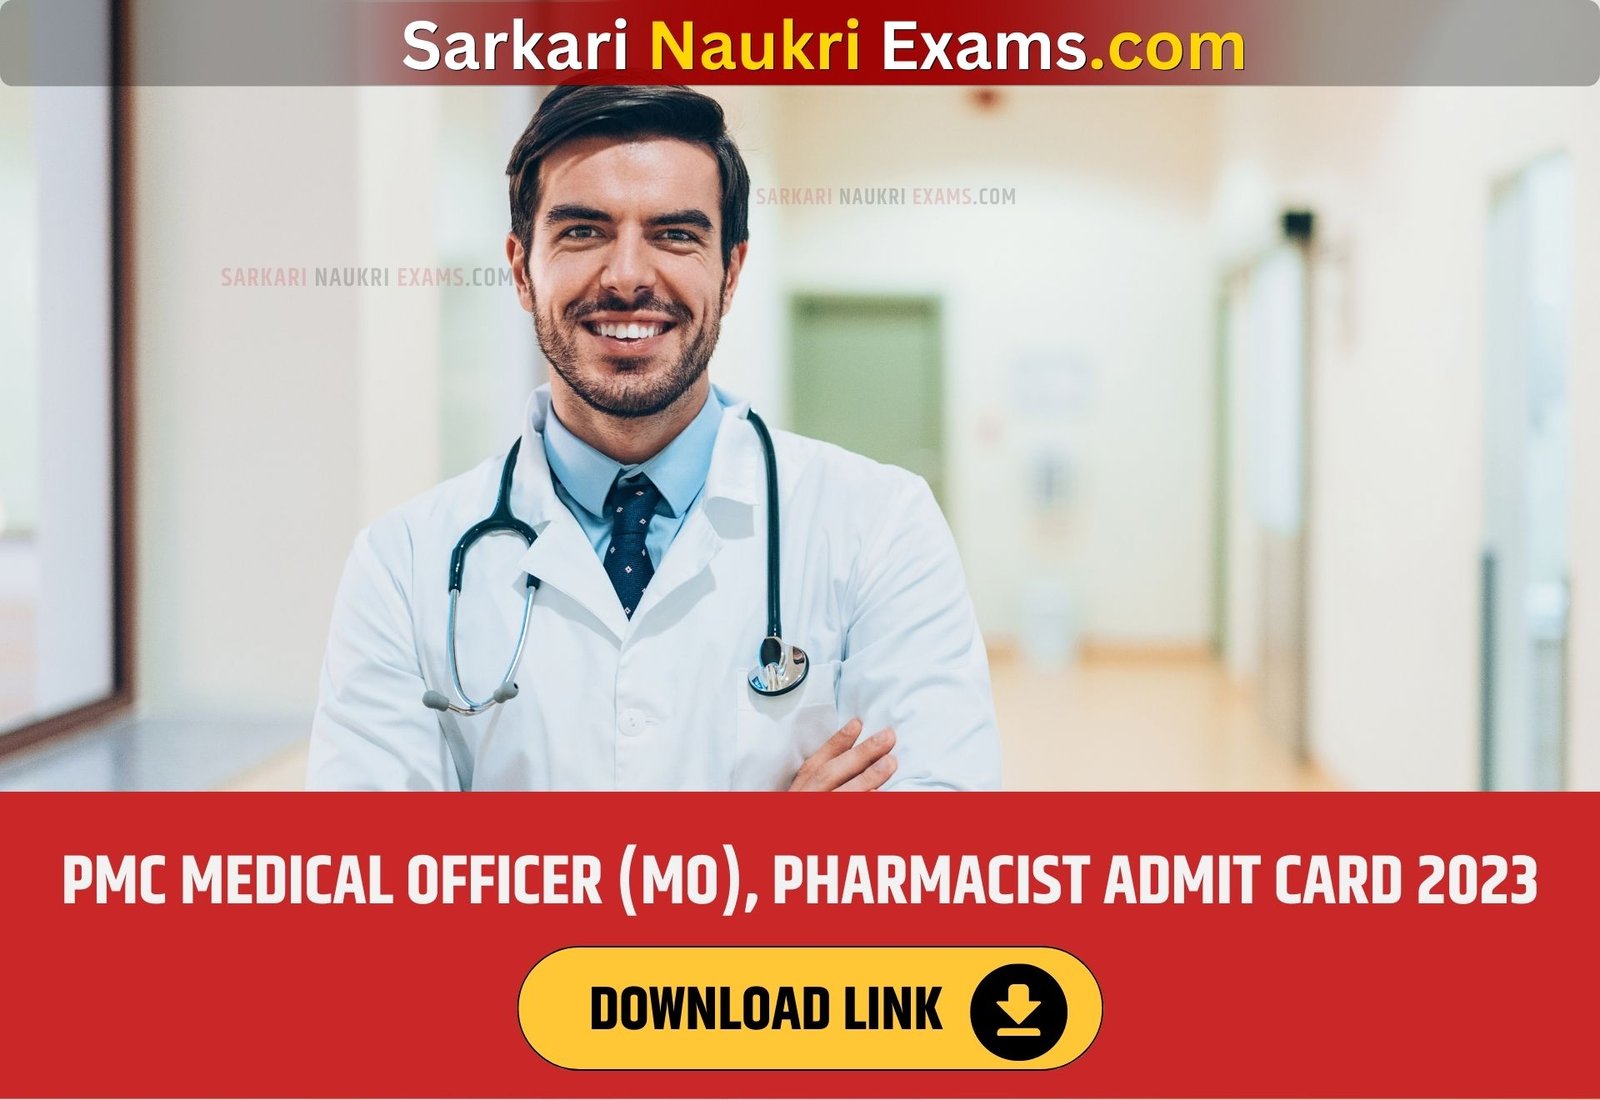 PMC Medical Officer (MO), Pharmacist Admit Card 2023 | Download Link, Exam Date